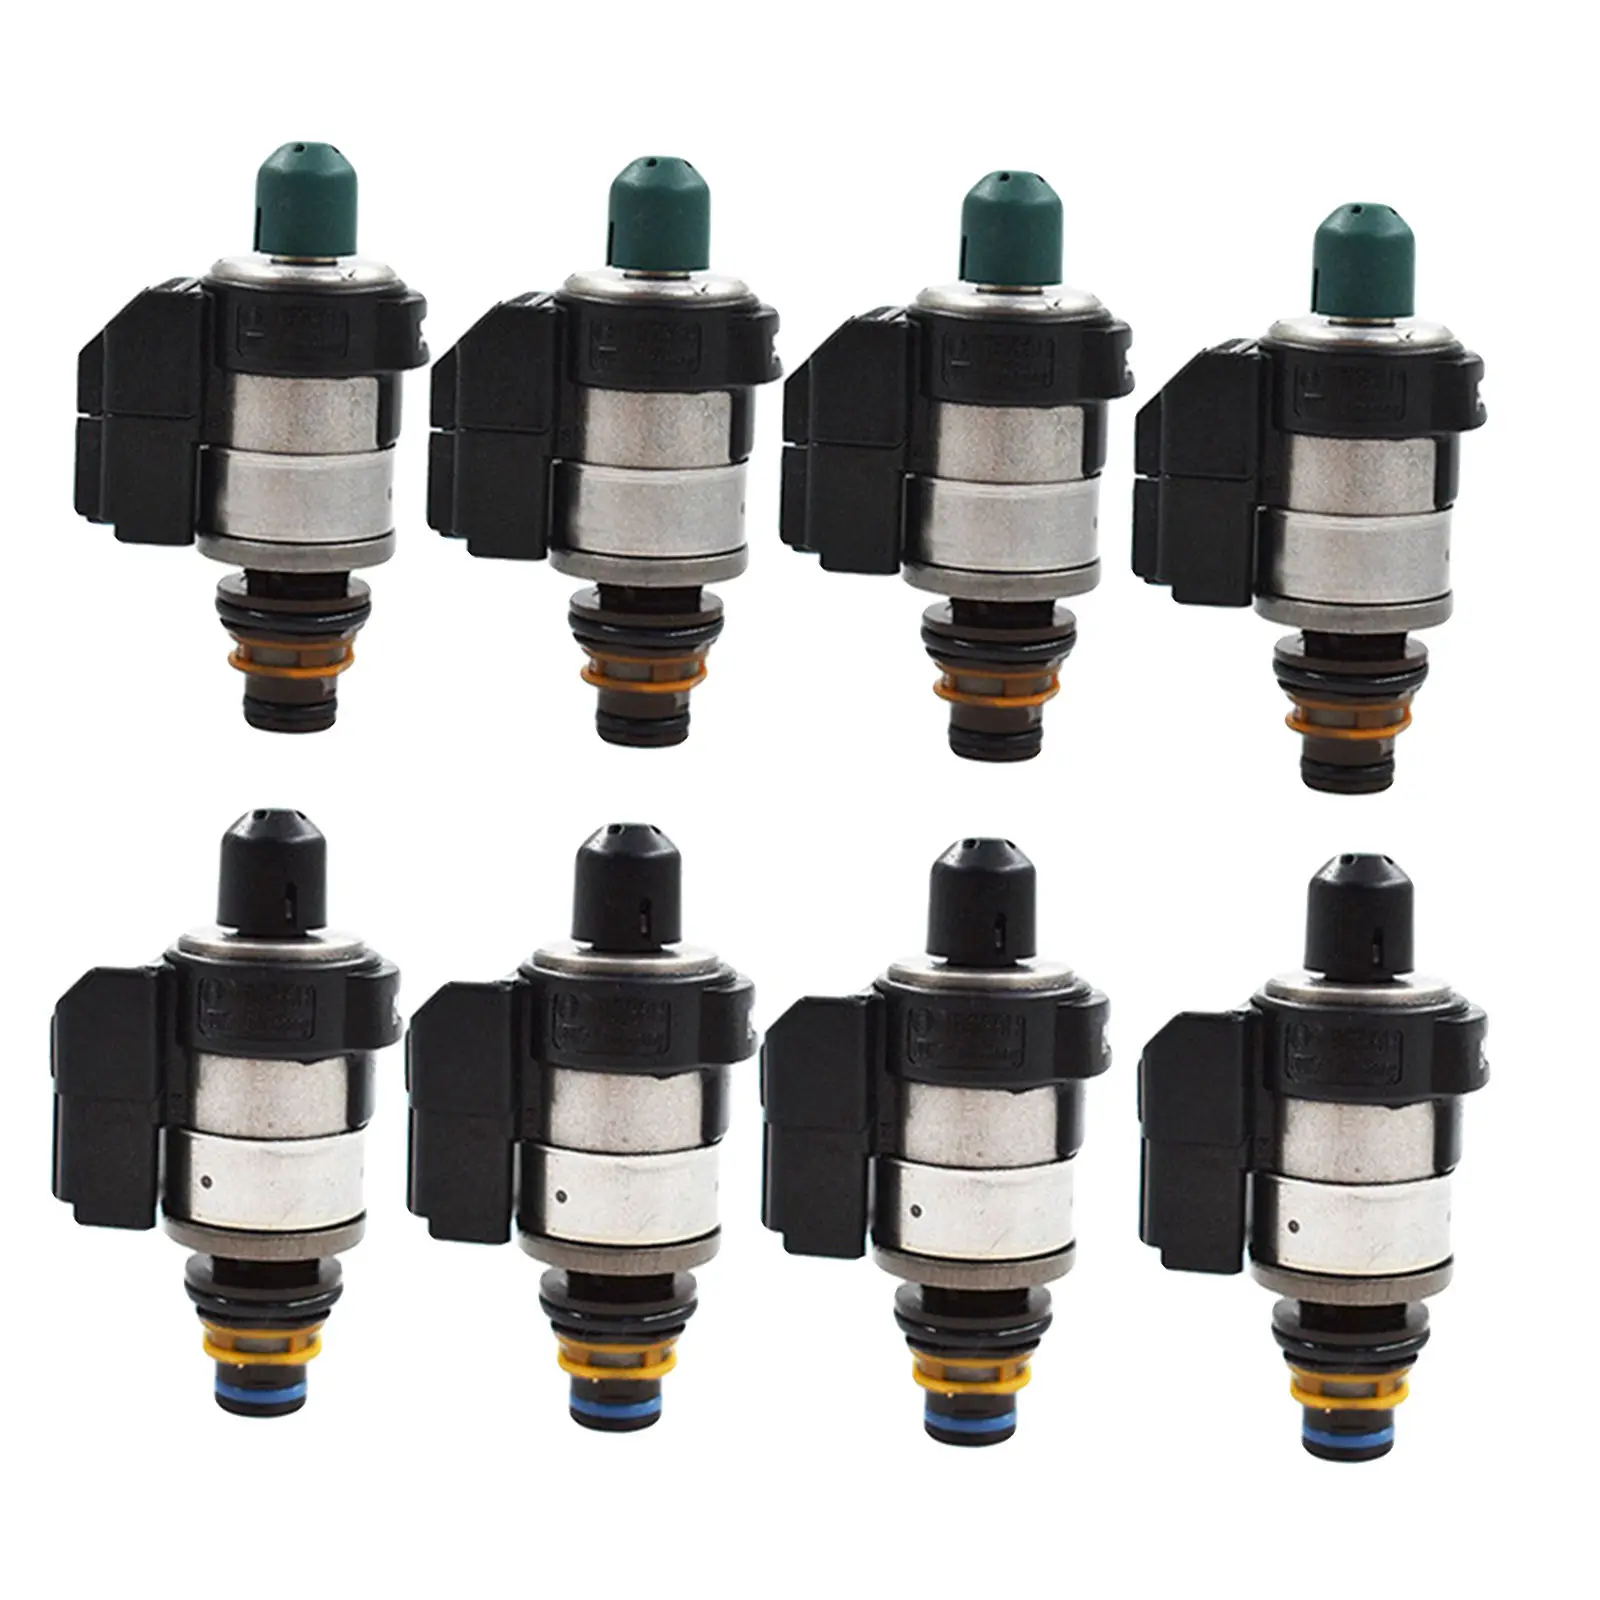 8x Car Transmission Solenoids Kit For 7 Speed Automatic Transmission 722.9 0260130035 Accessories